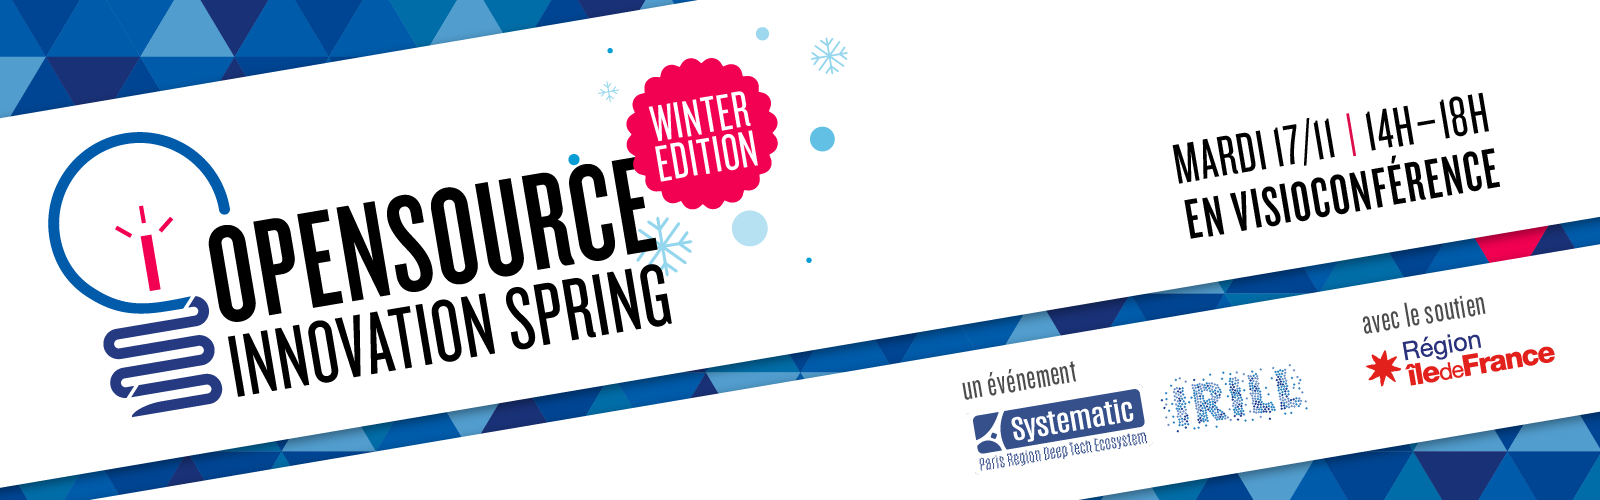 Open Source Innovation Spring | Winter Edition 2020 [OSIS]